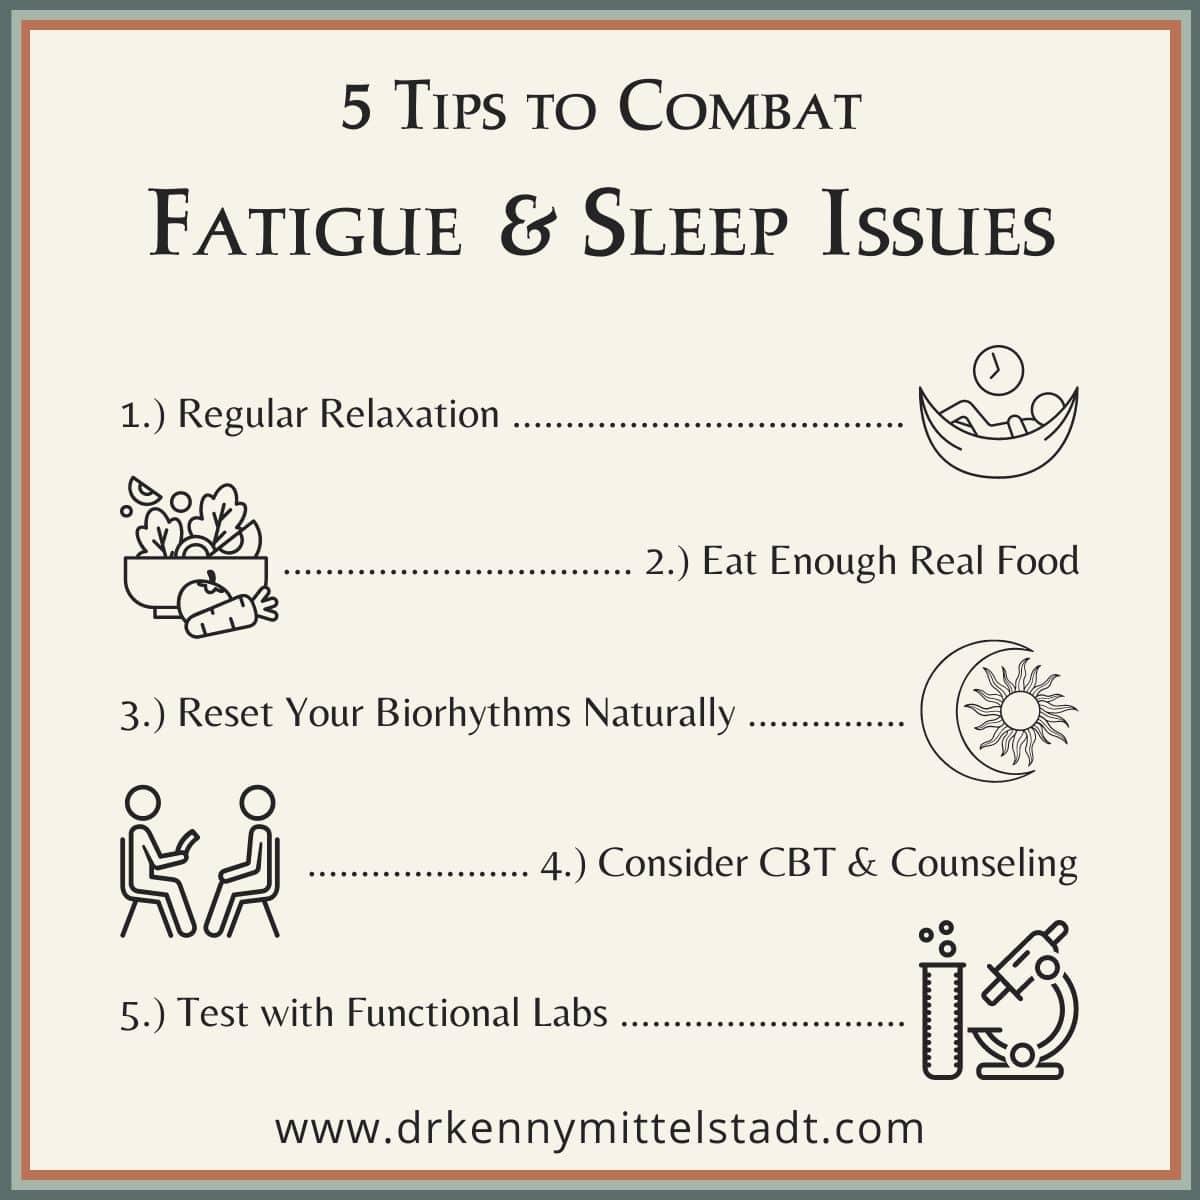 This infographic displays the summaries of 5 tips to combat fatigue and sleep issues. They include regular relaxation, eating enough real food, resetting biorhythms naturally, considering DBT or counseling, and testing with functional labs.